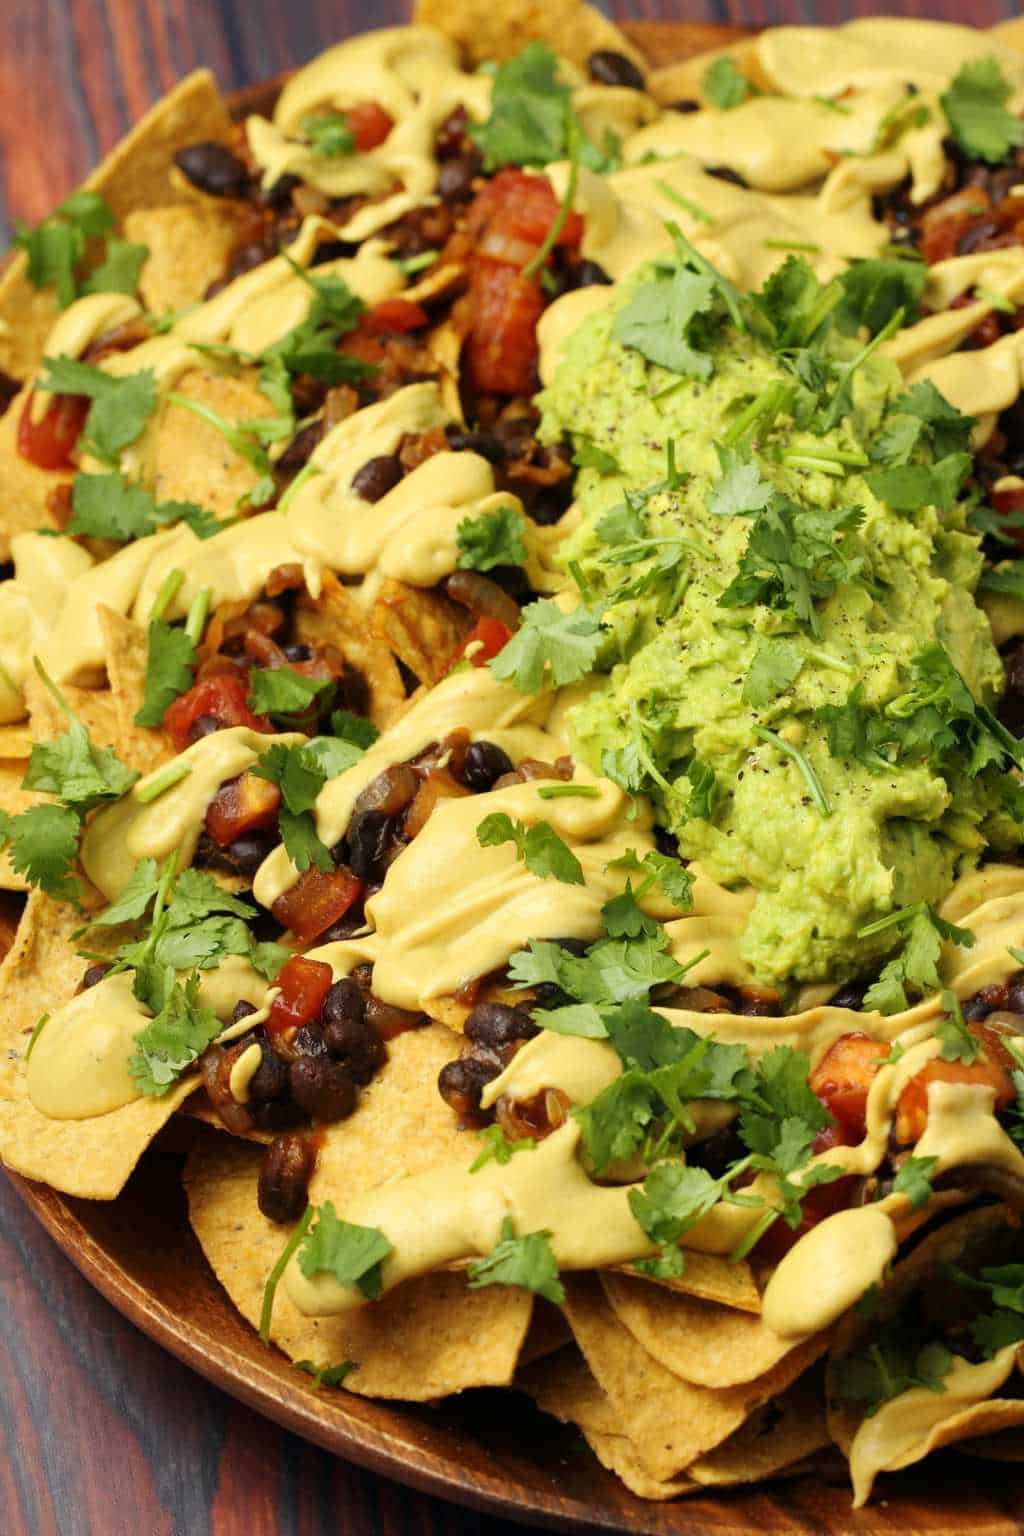 Vegan nacho cheese poured over fully loaded nachos with black beans, salsa and guacamole. 